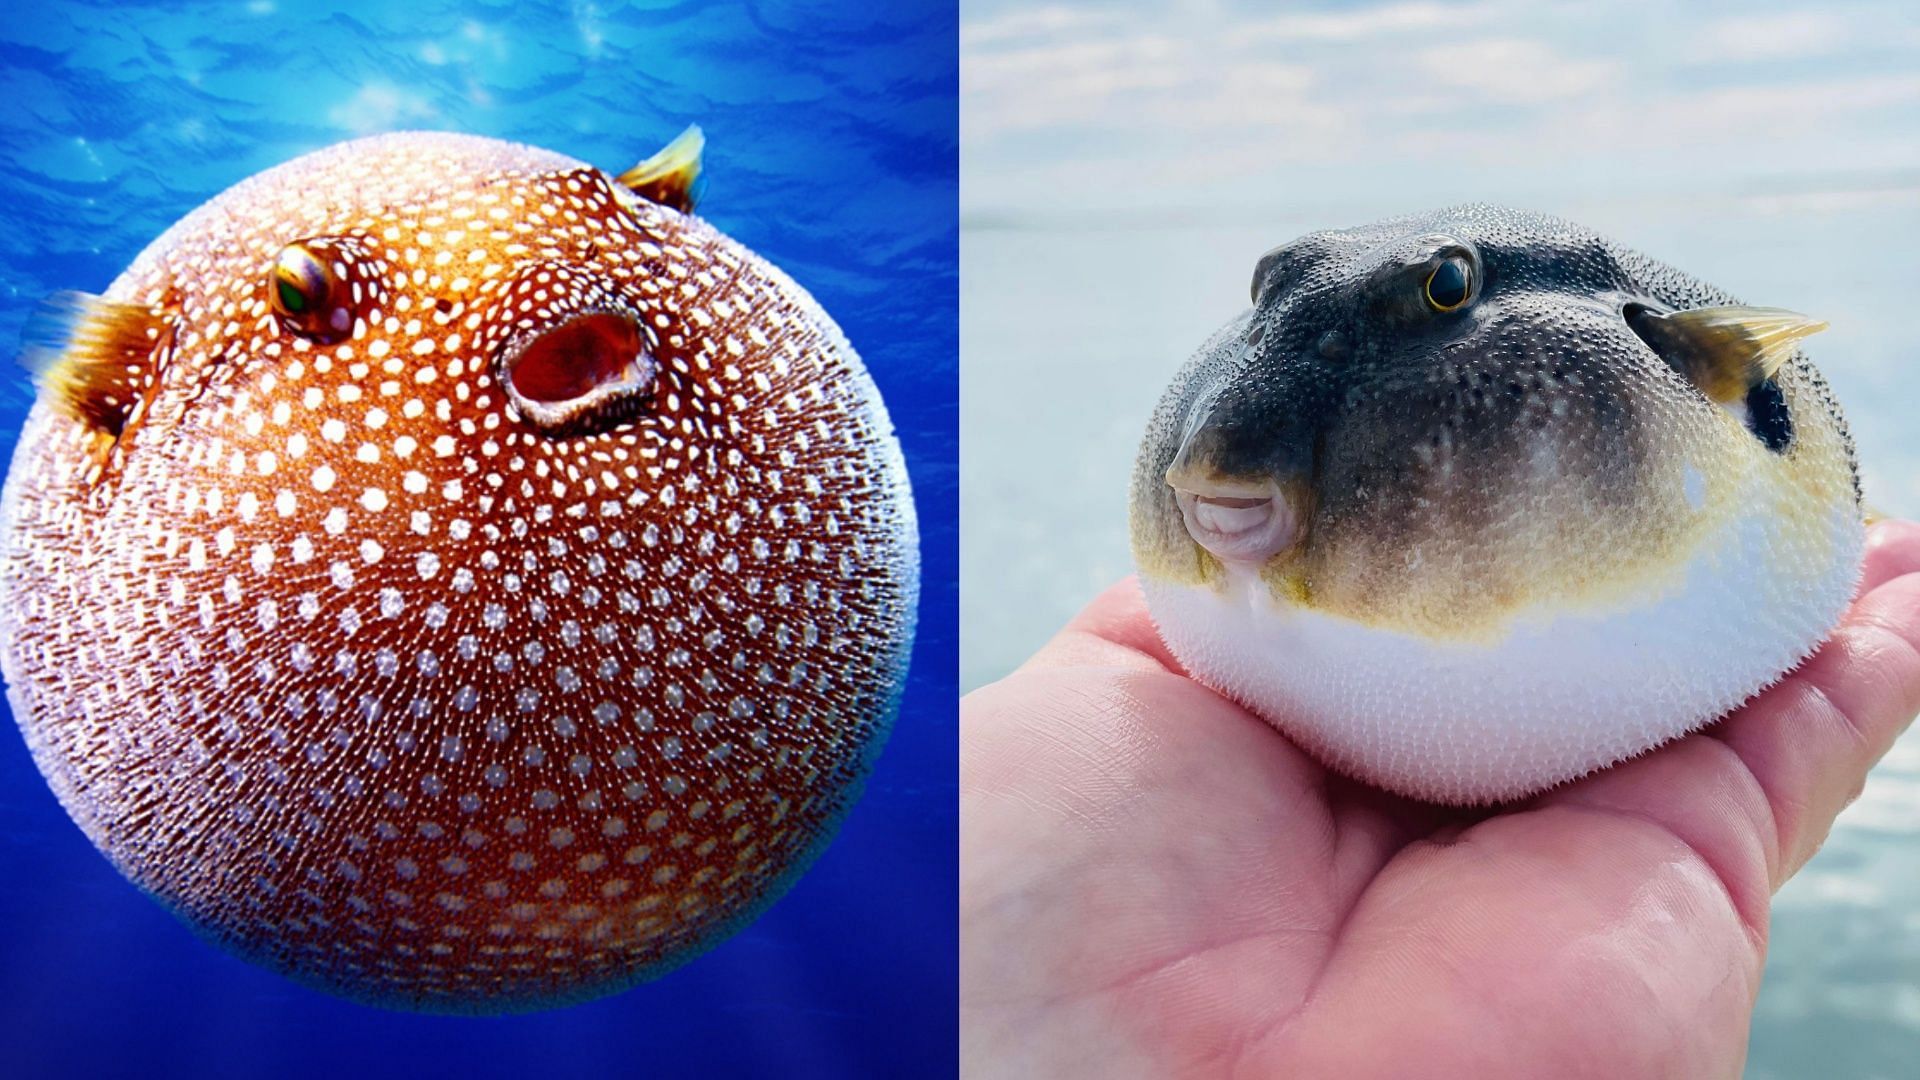 Brazilian man dies after eating pufferfish. (Image via Facebook/Discovery Channel UK, Ed Piotrowski WPDE)